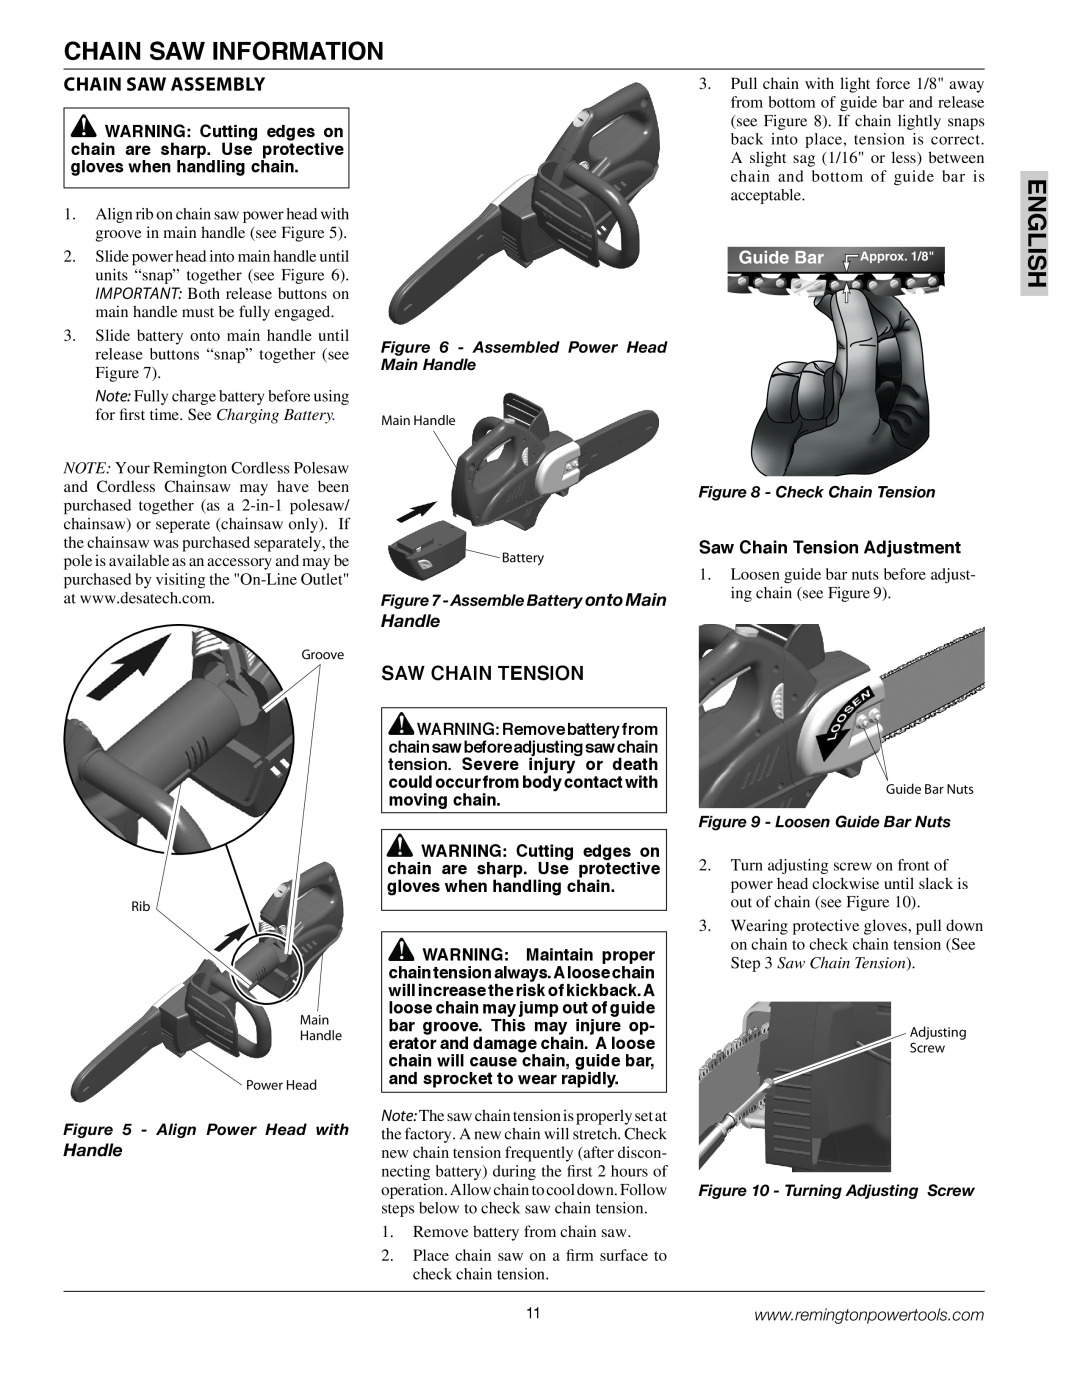 Remington BS188A, BPS188A owner manual Chain Saw Information, English, Chain Saw Assembly, Saw Chain Tension, Handle 